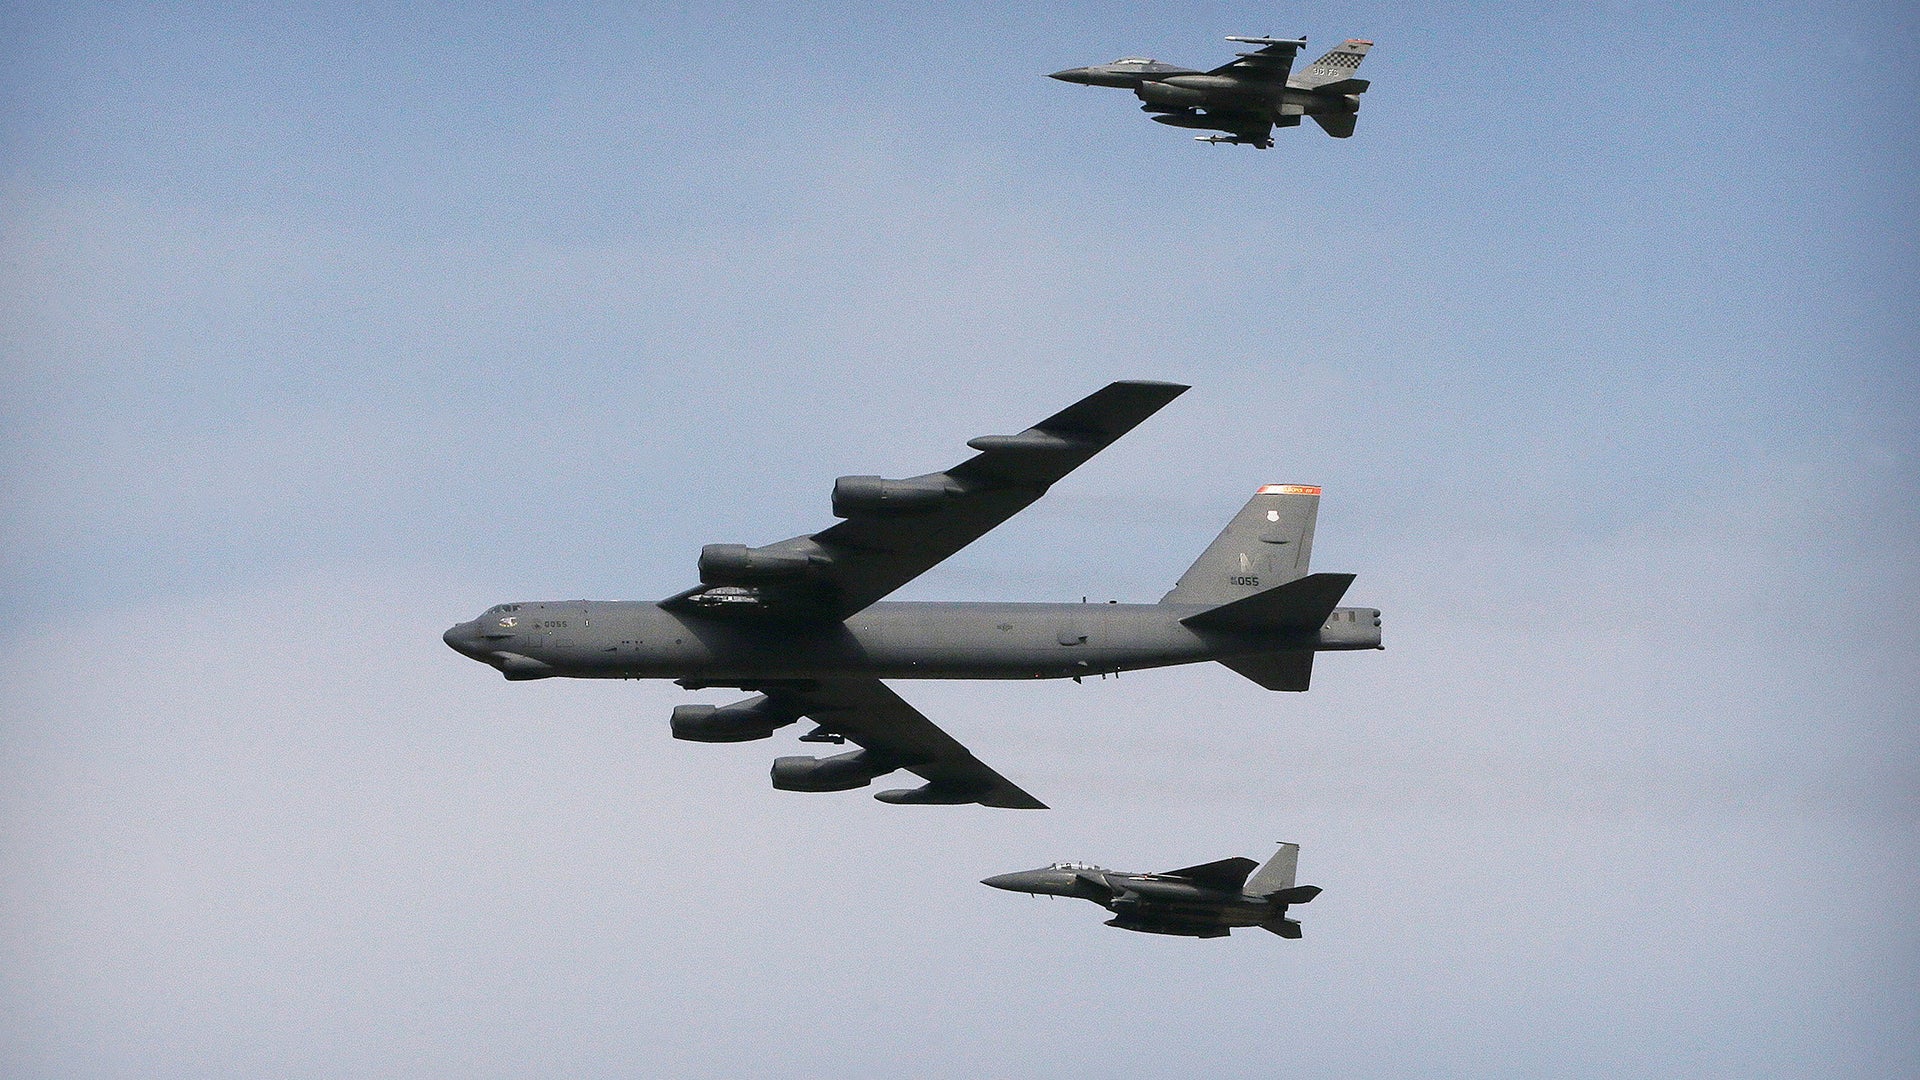 The B-52 aircraft will uncommonly touch down in South Korea this week.